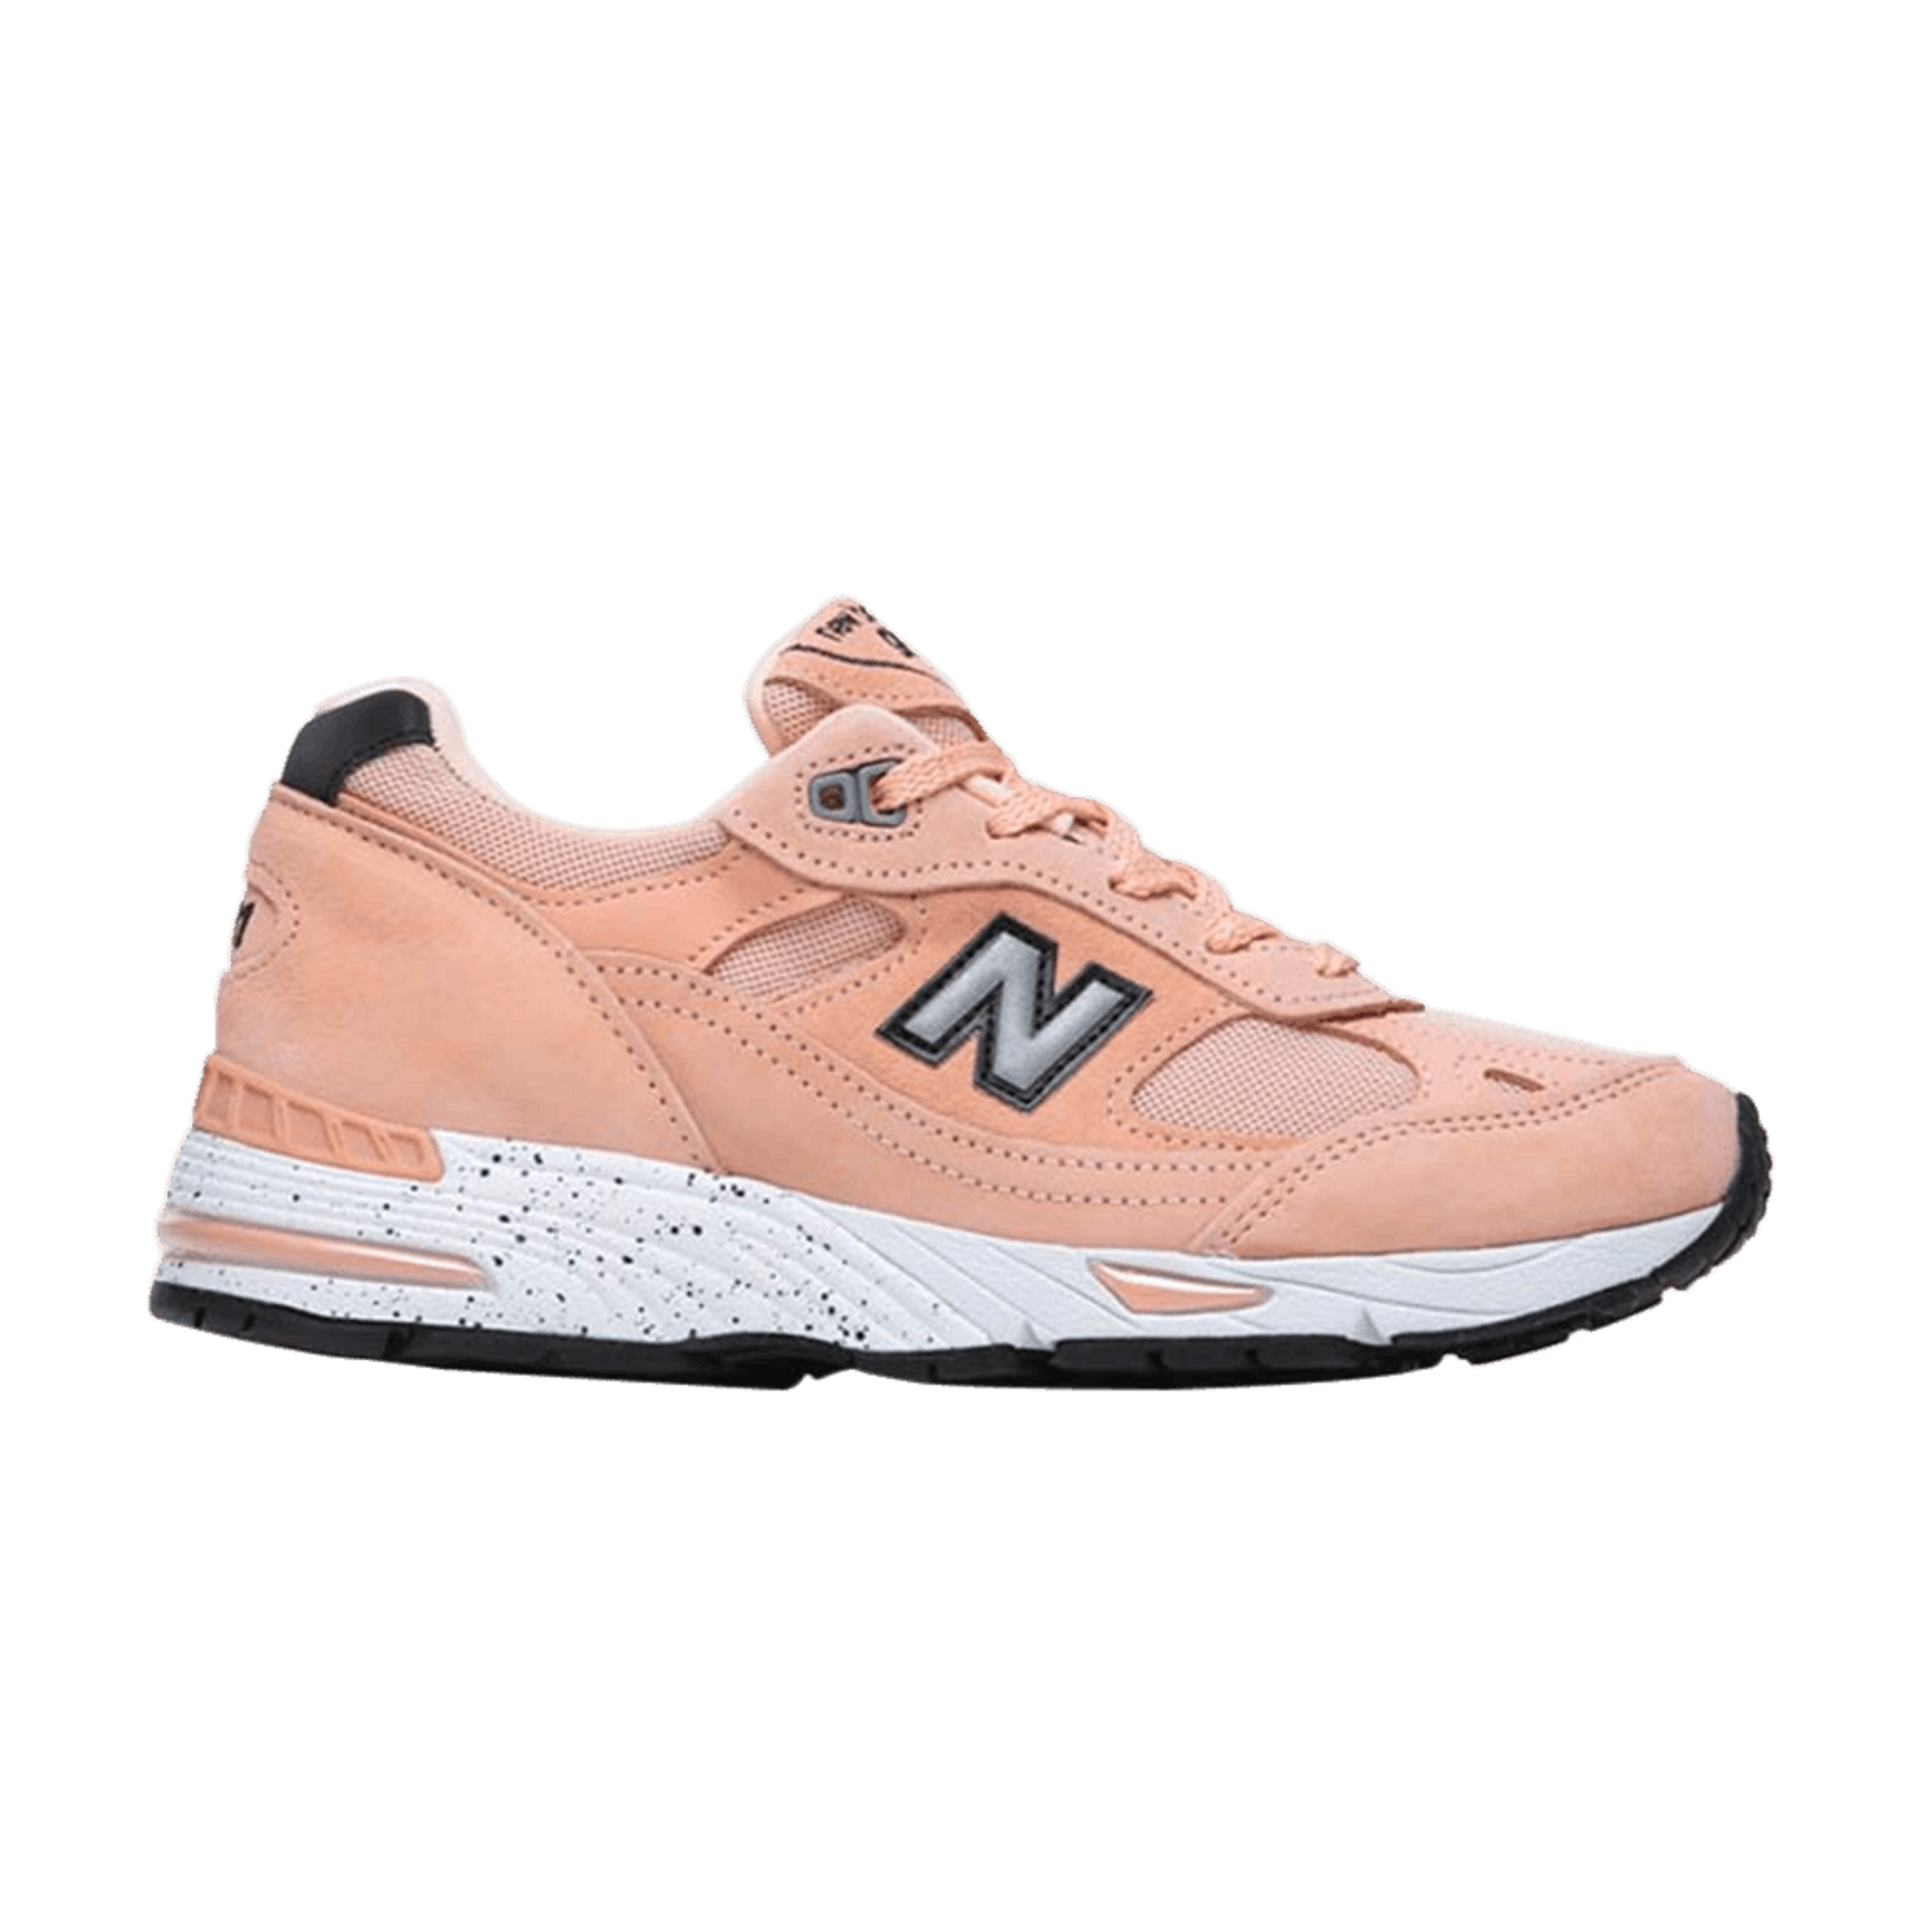 New Balance Naked x Wmns 991 'Made In England'